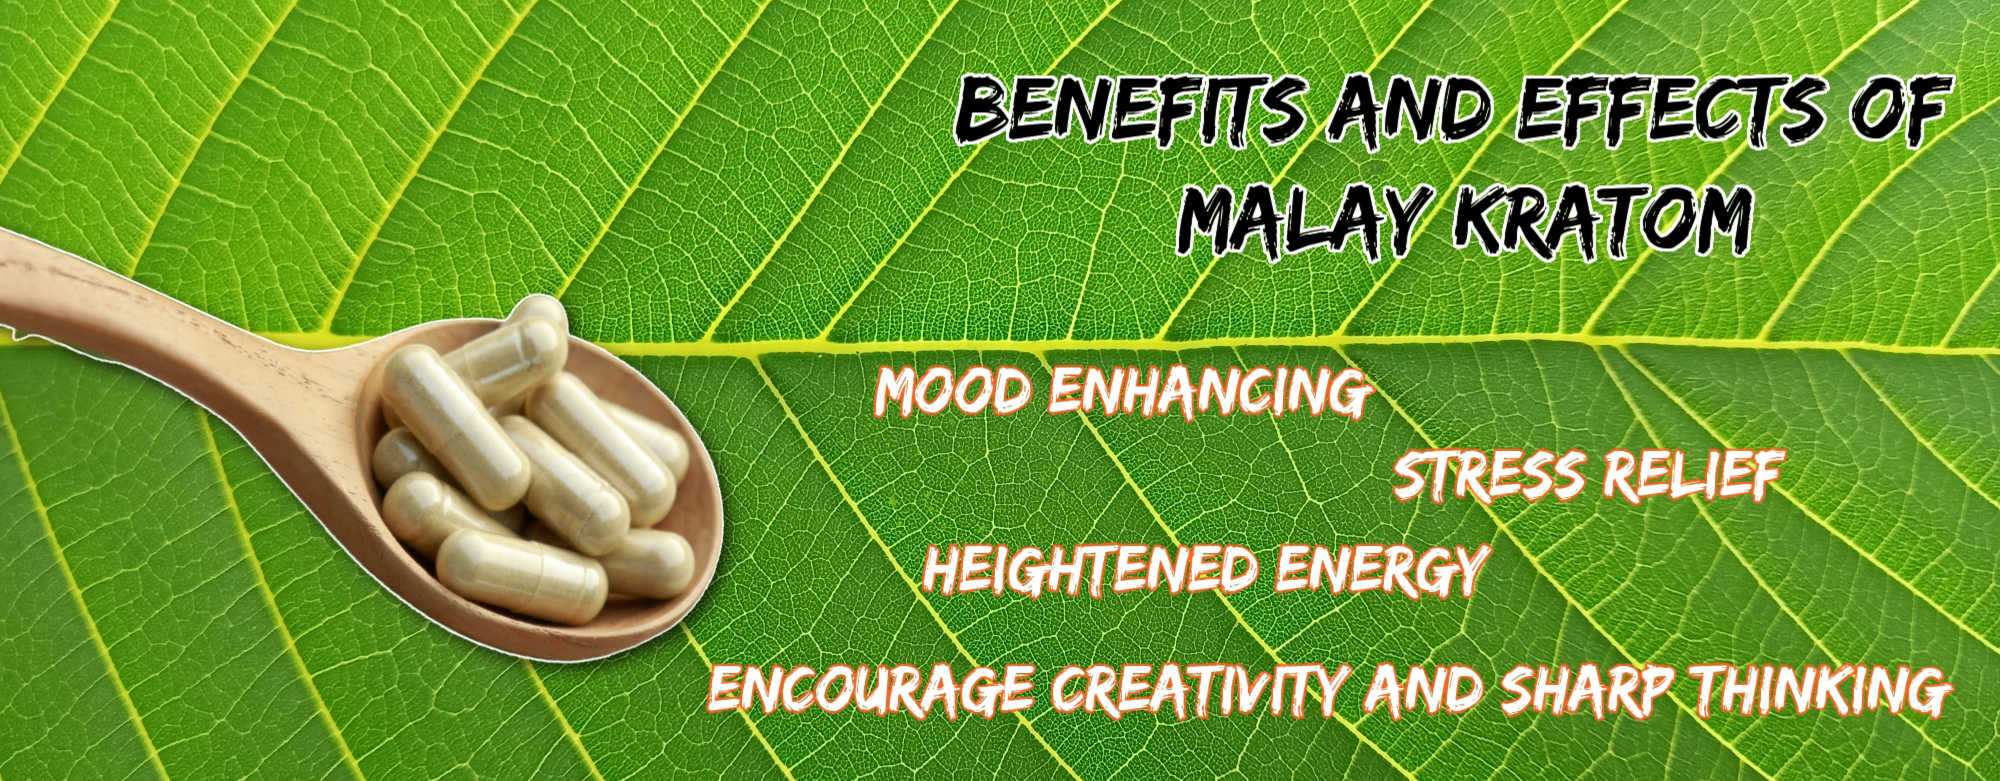 image of malay kratom benefits and effects